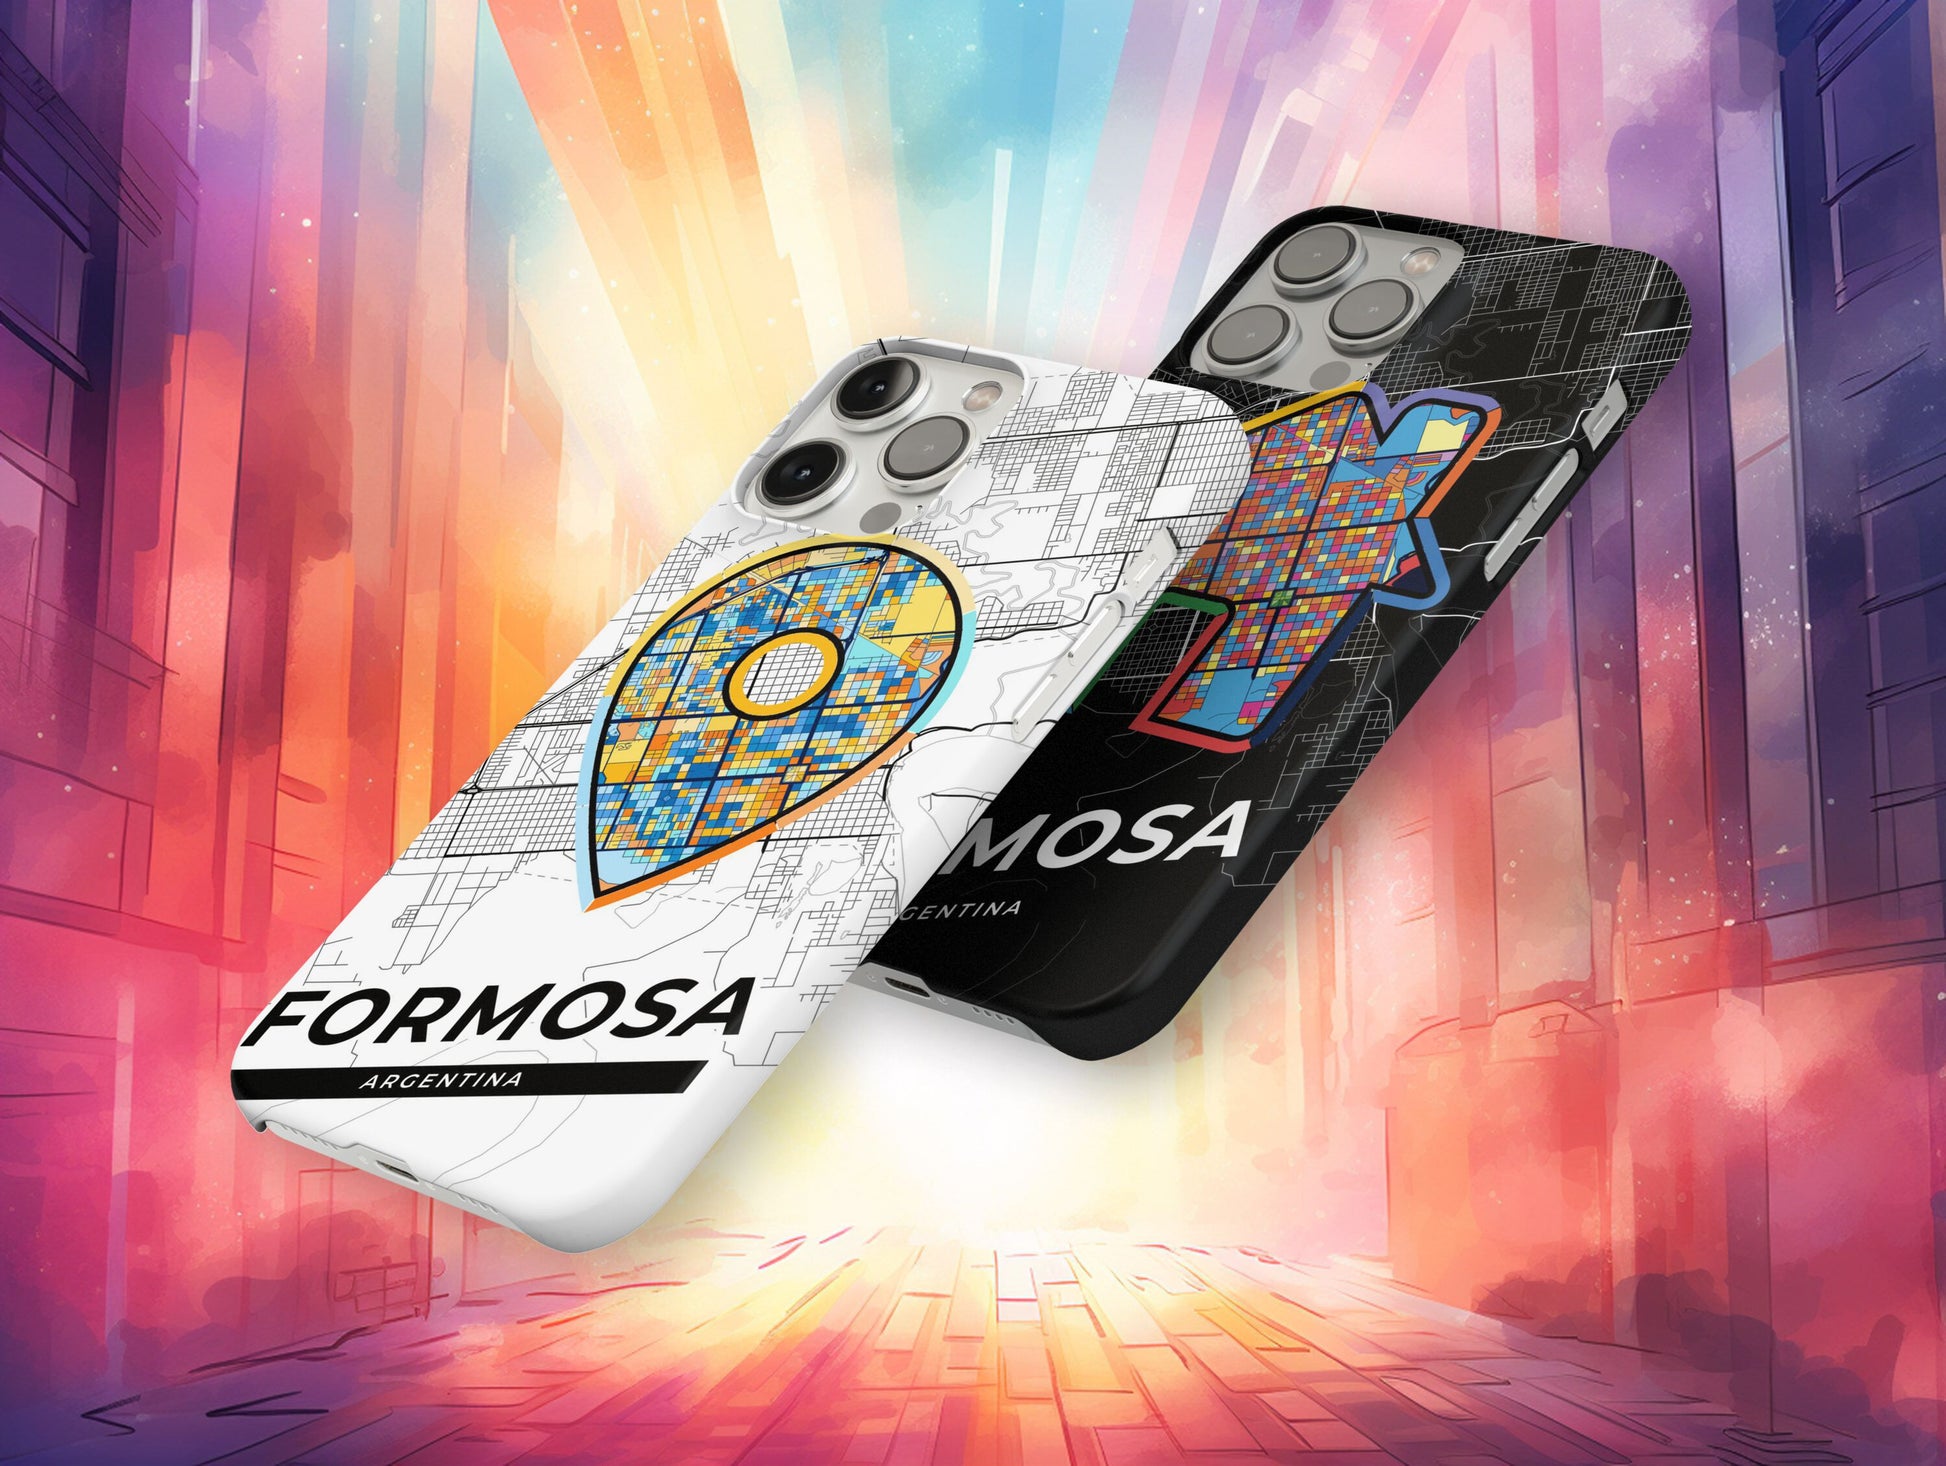 Formosa Argentina slim phone case with colorful icon. Birthday, wedding or housewarming gift. Couple match cases.